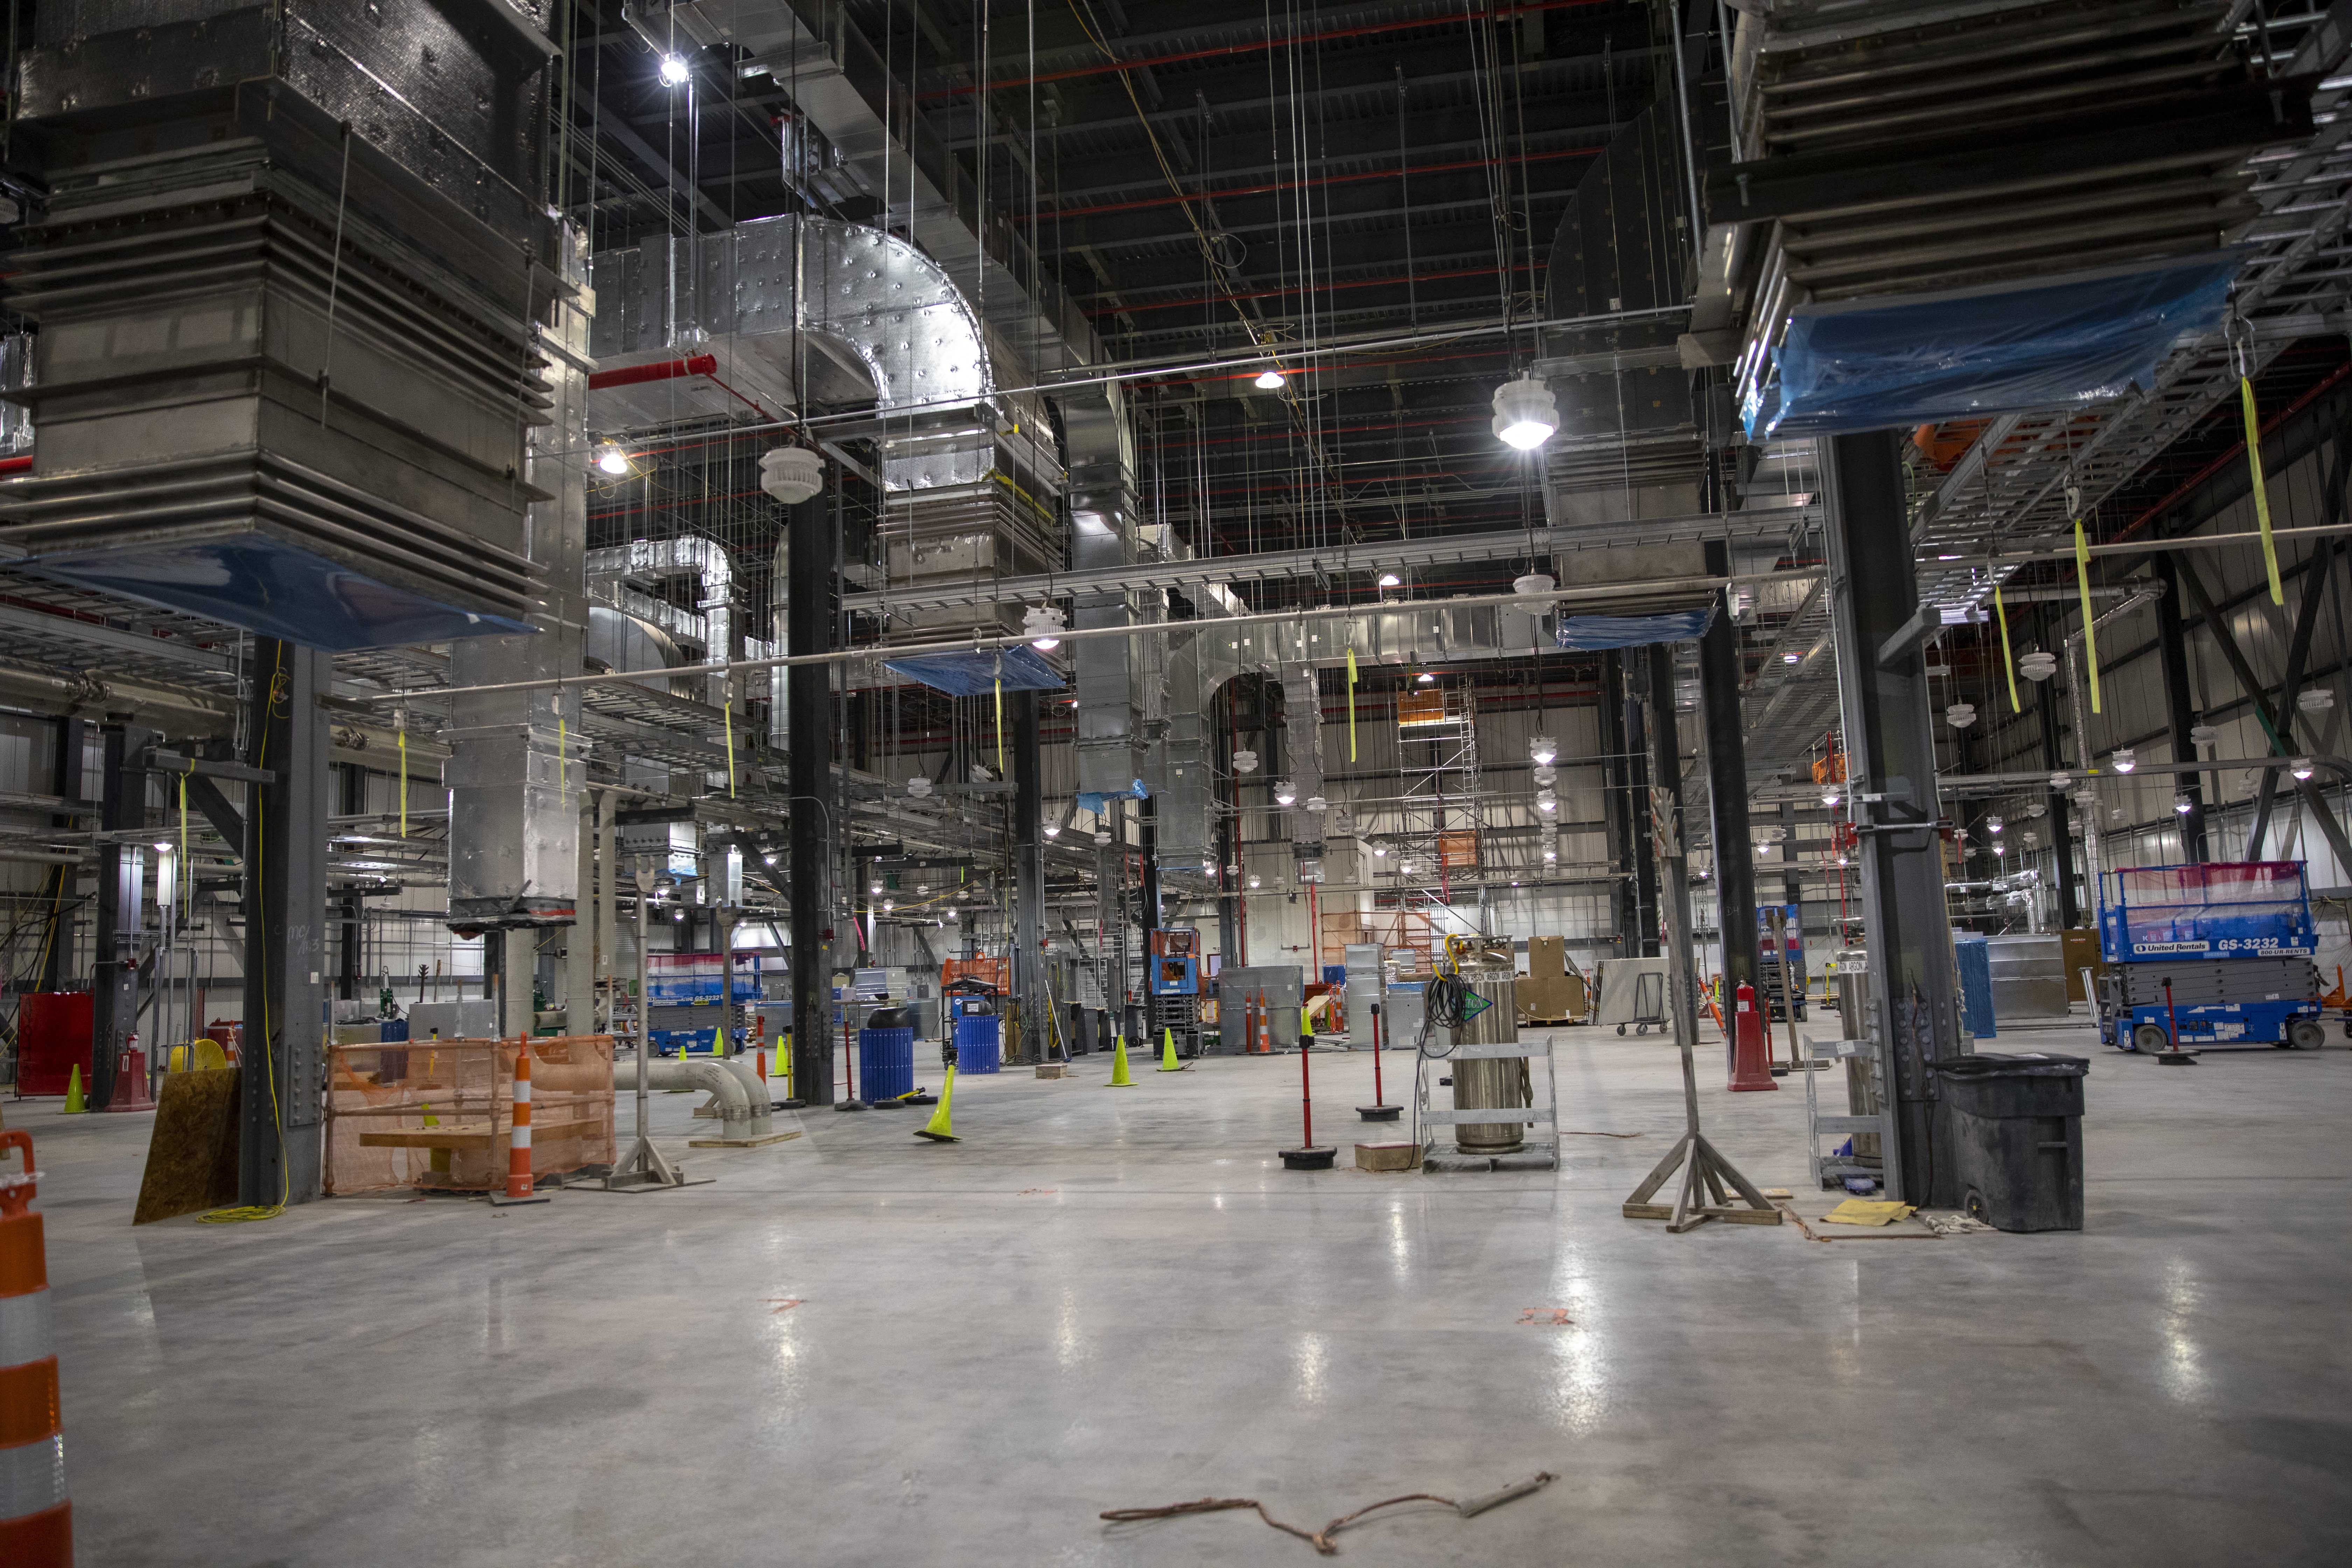 The Mechanical Electrical Building (MEB) continues to work through final construction activities to support turn-over to start-up in July and August.